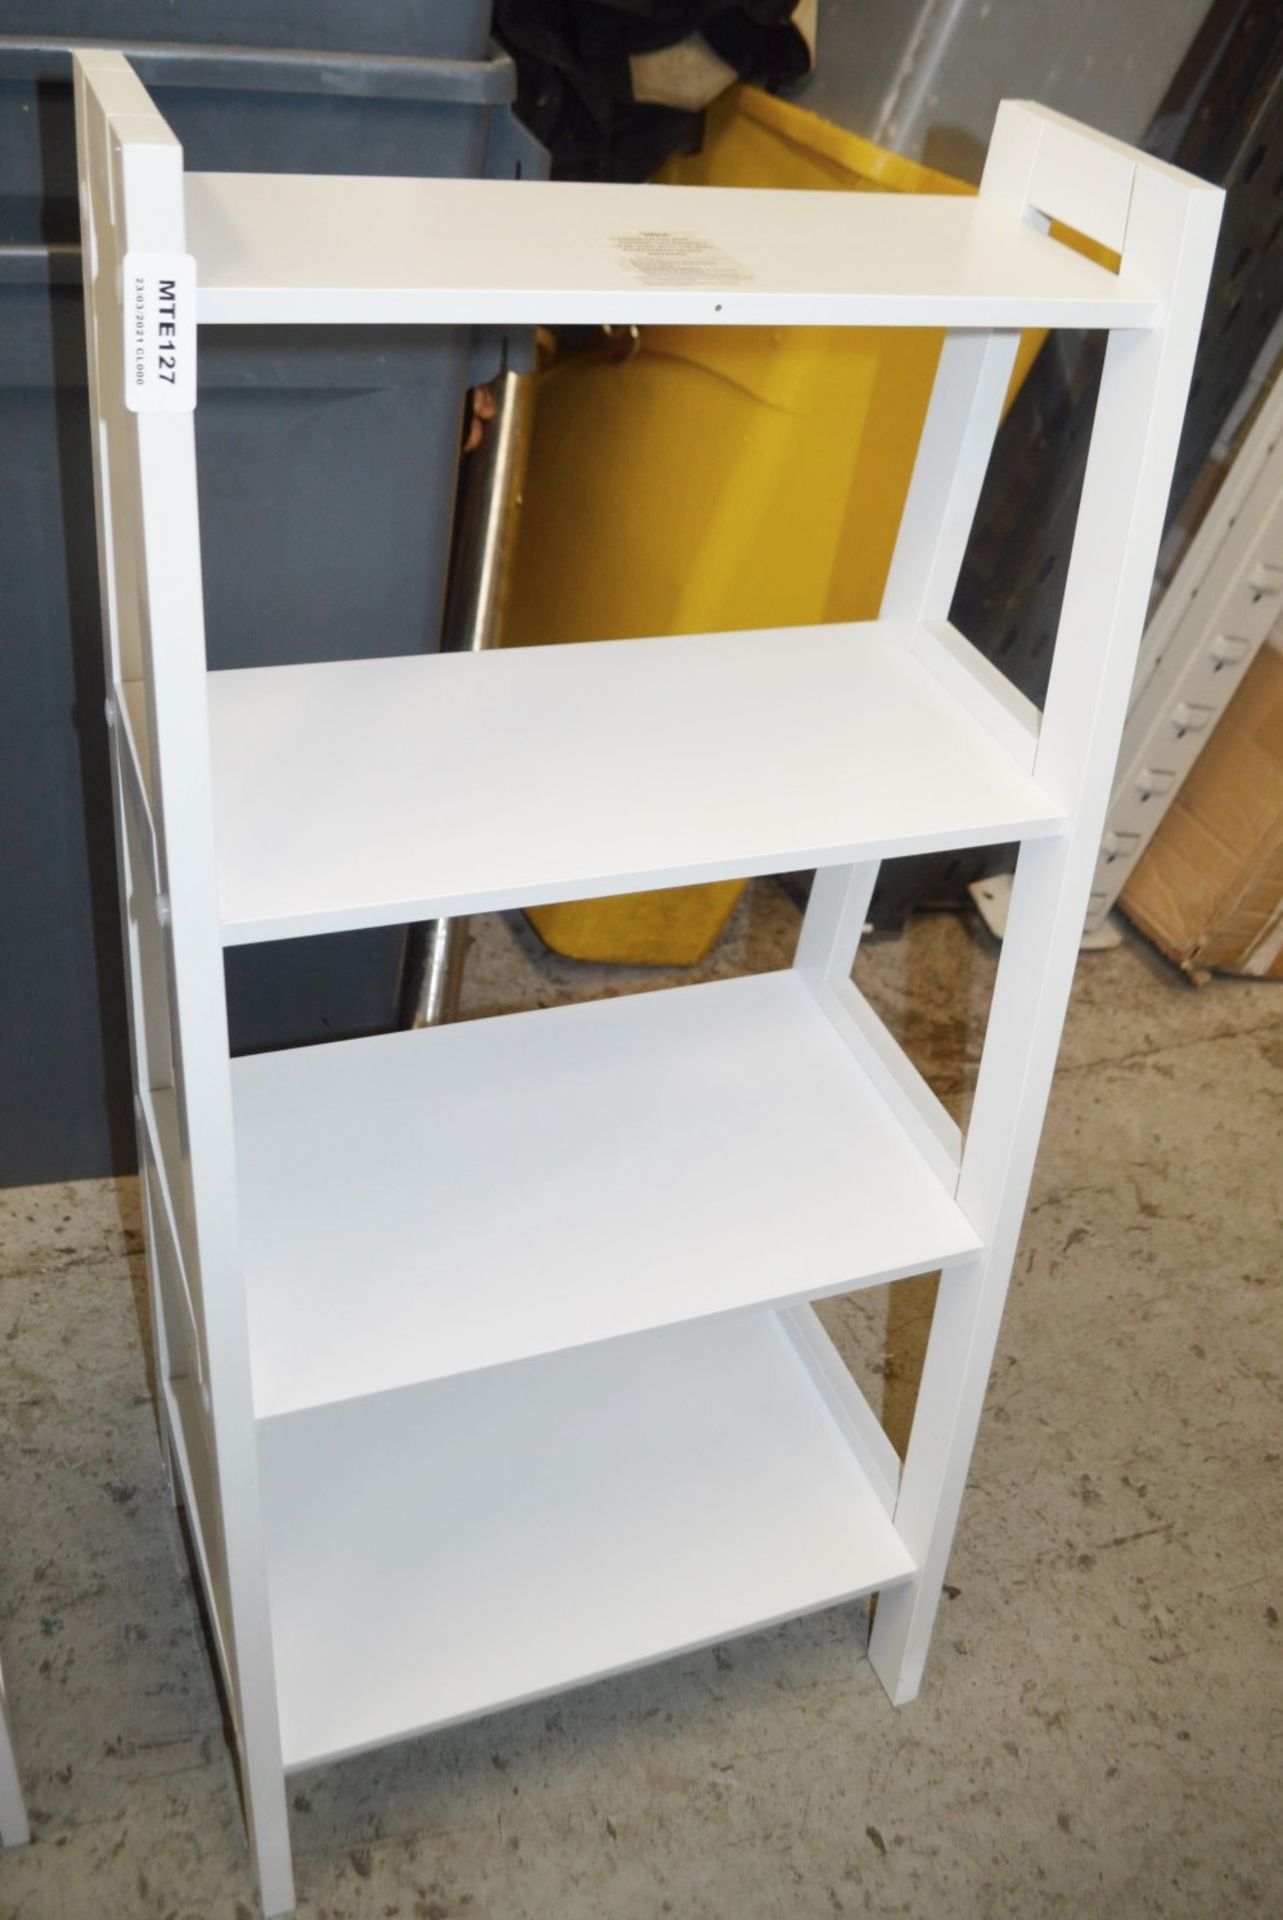 1 x Small Wooden Shelving Unit In White - Preowned, From An Exclusive Property - Dimensions: H90 x